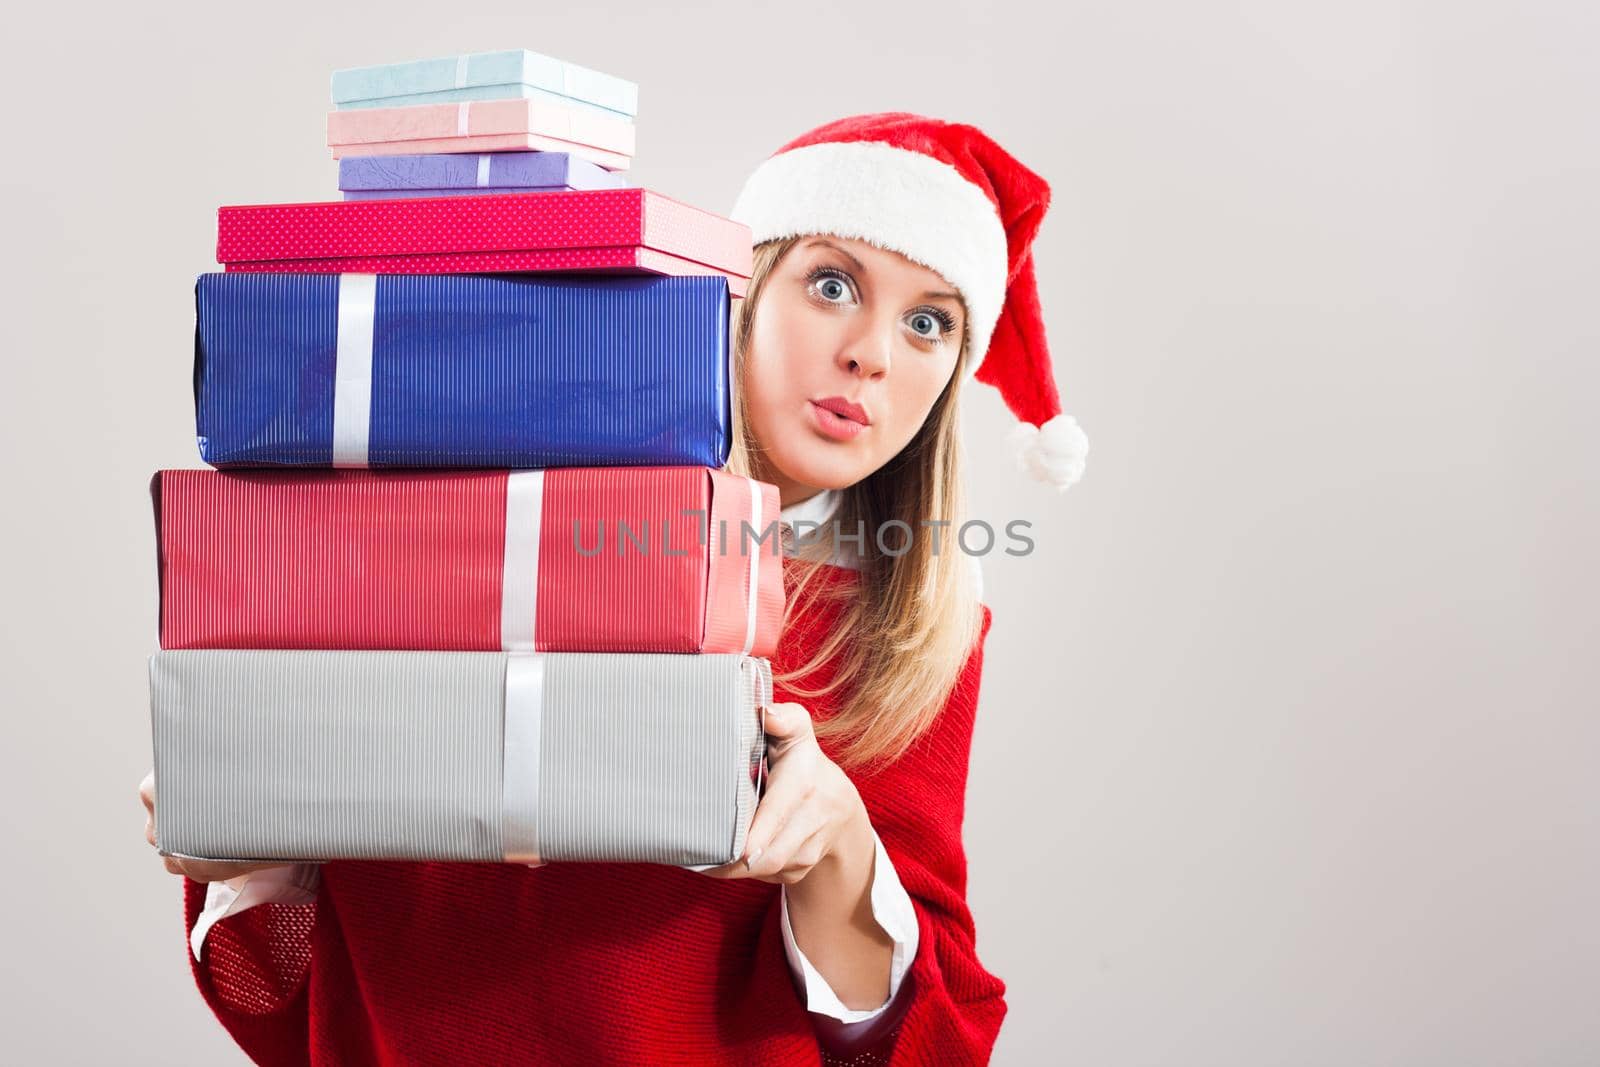 Image of  excited  young woman holding Christmas presents.